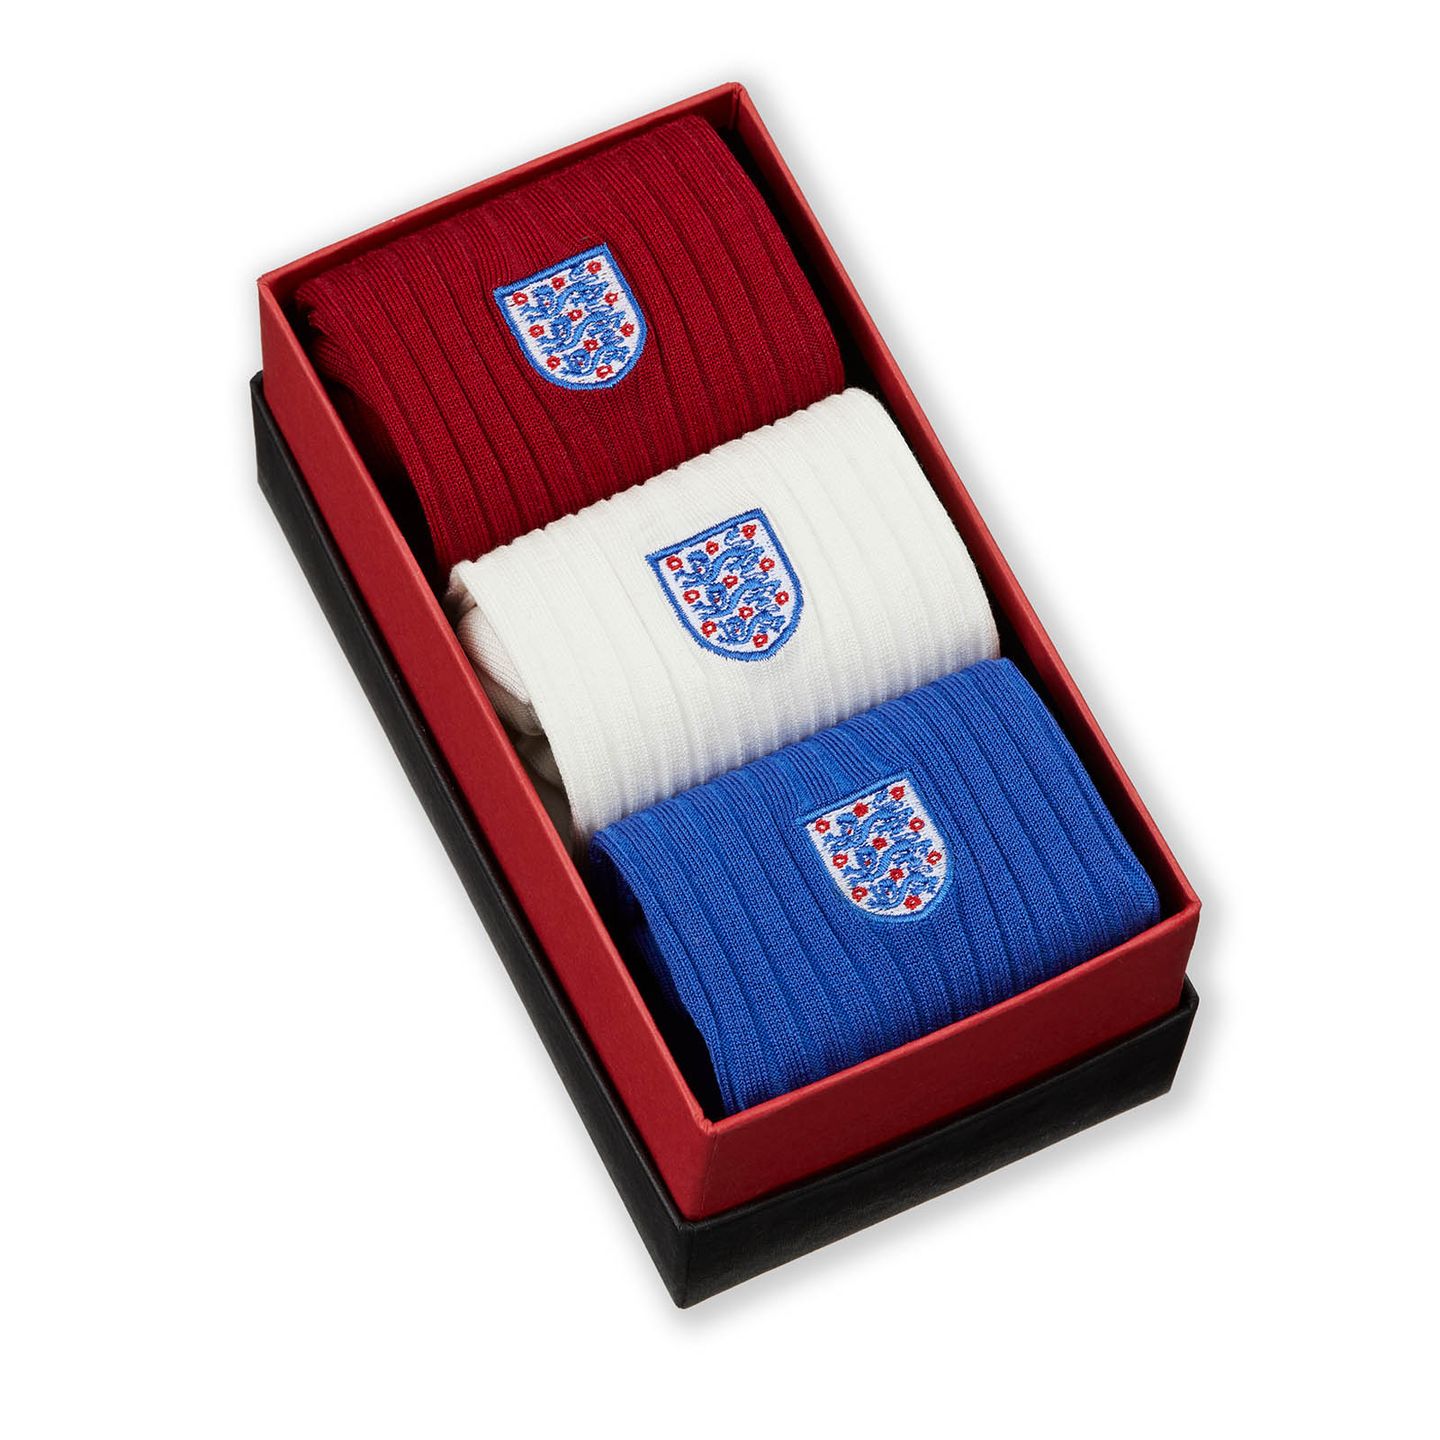 Trio presentation box of 3 lion socks in red, white and blue